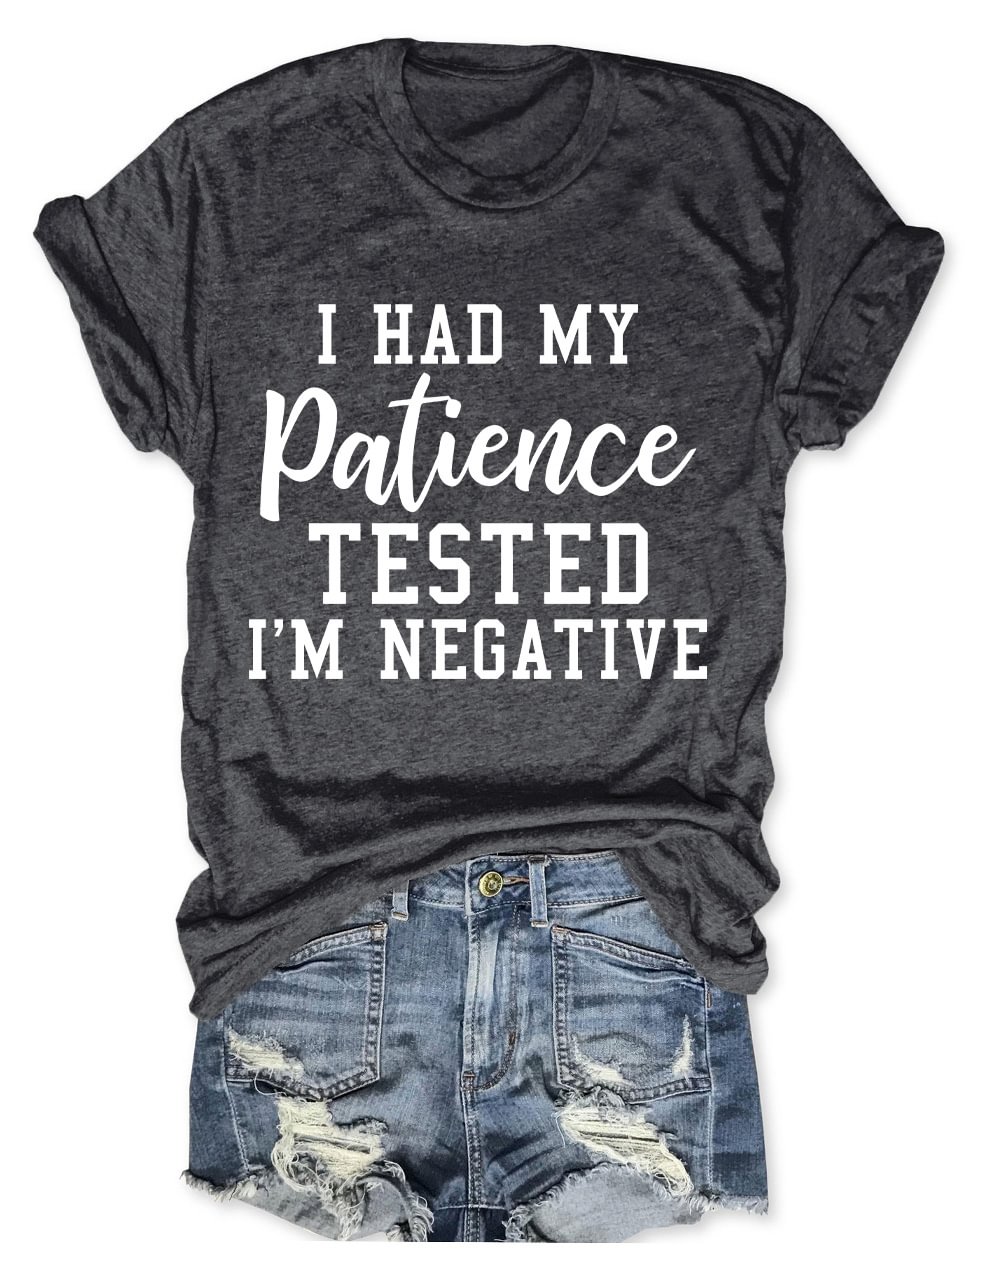 I Had My Patience Tested I'm Negative T-Shirt